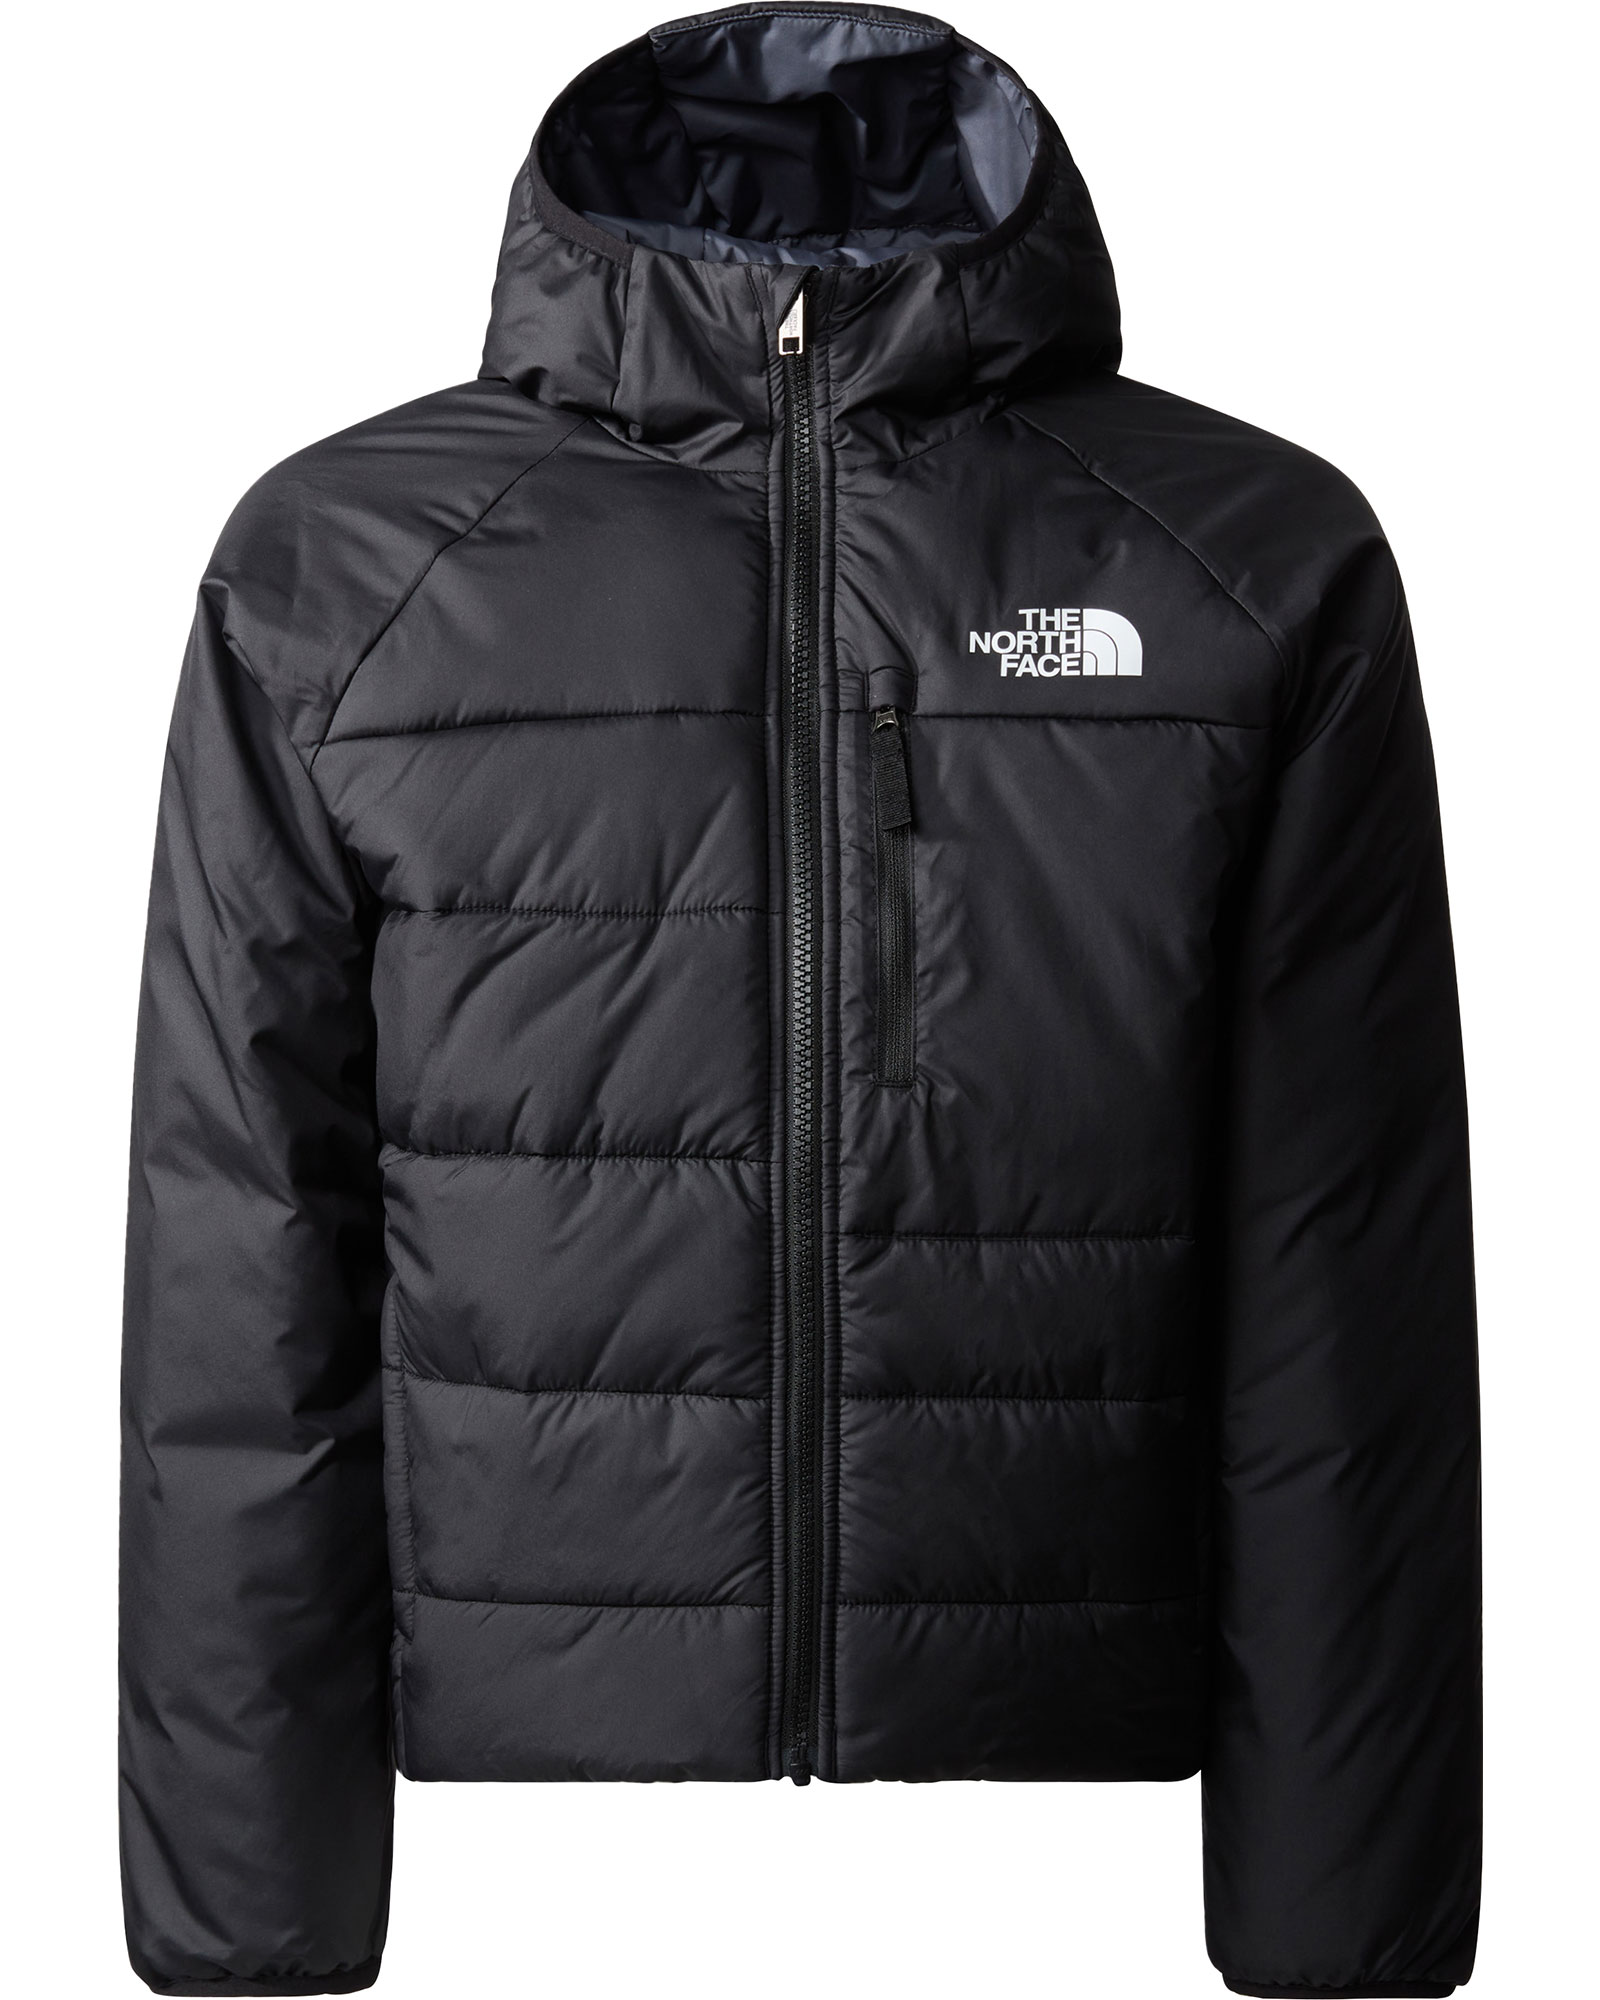 The North Face Boy's Reversible Perrito Insulated Jacket | Ellis Brigham